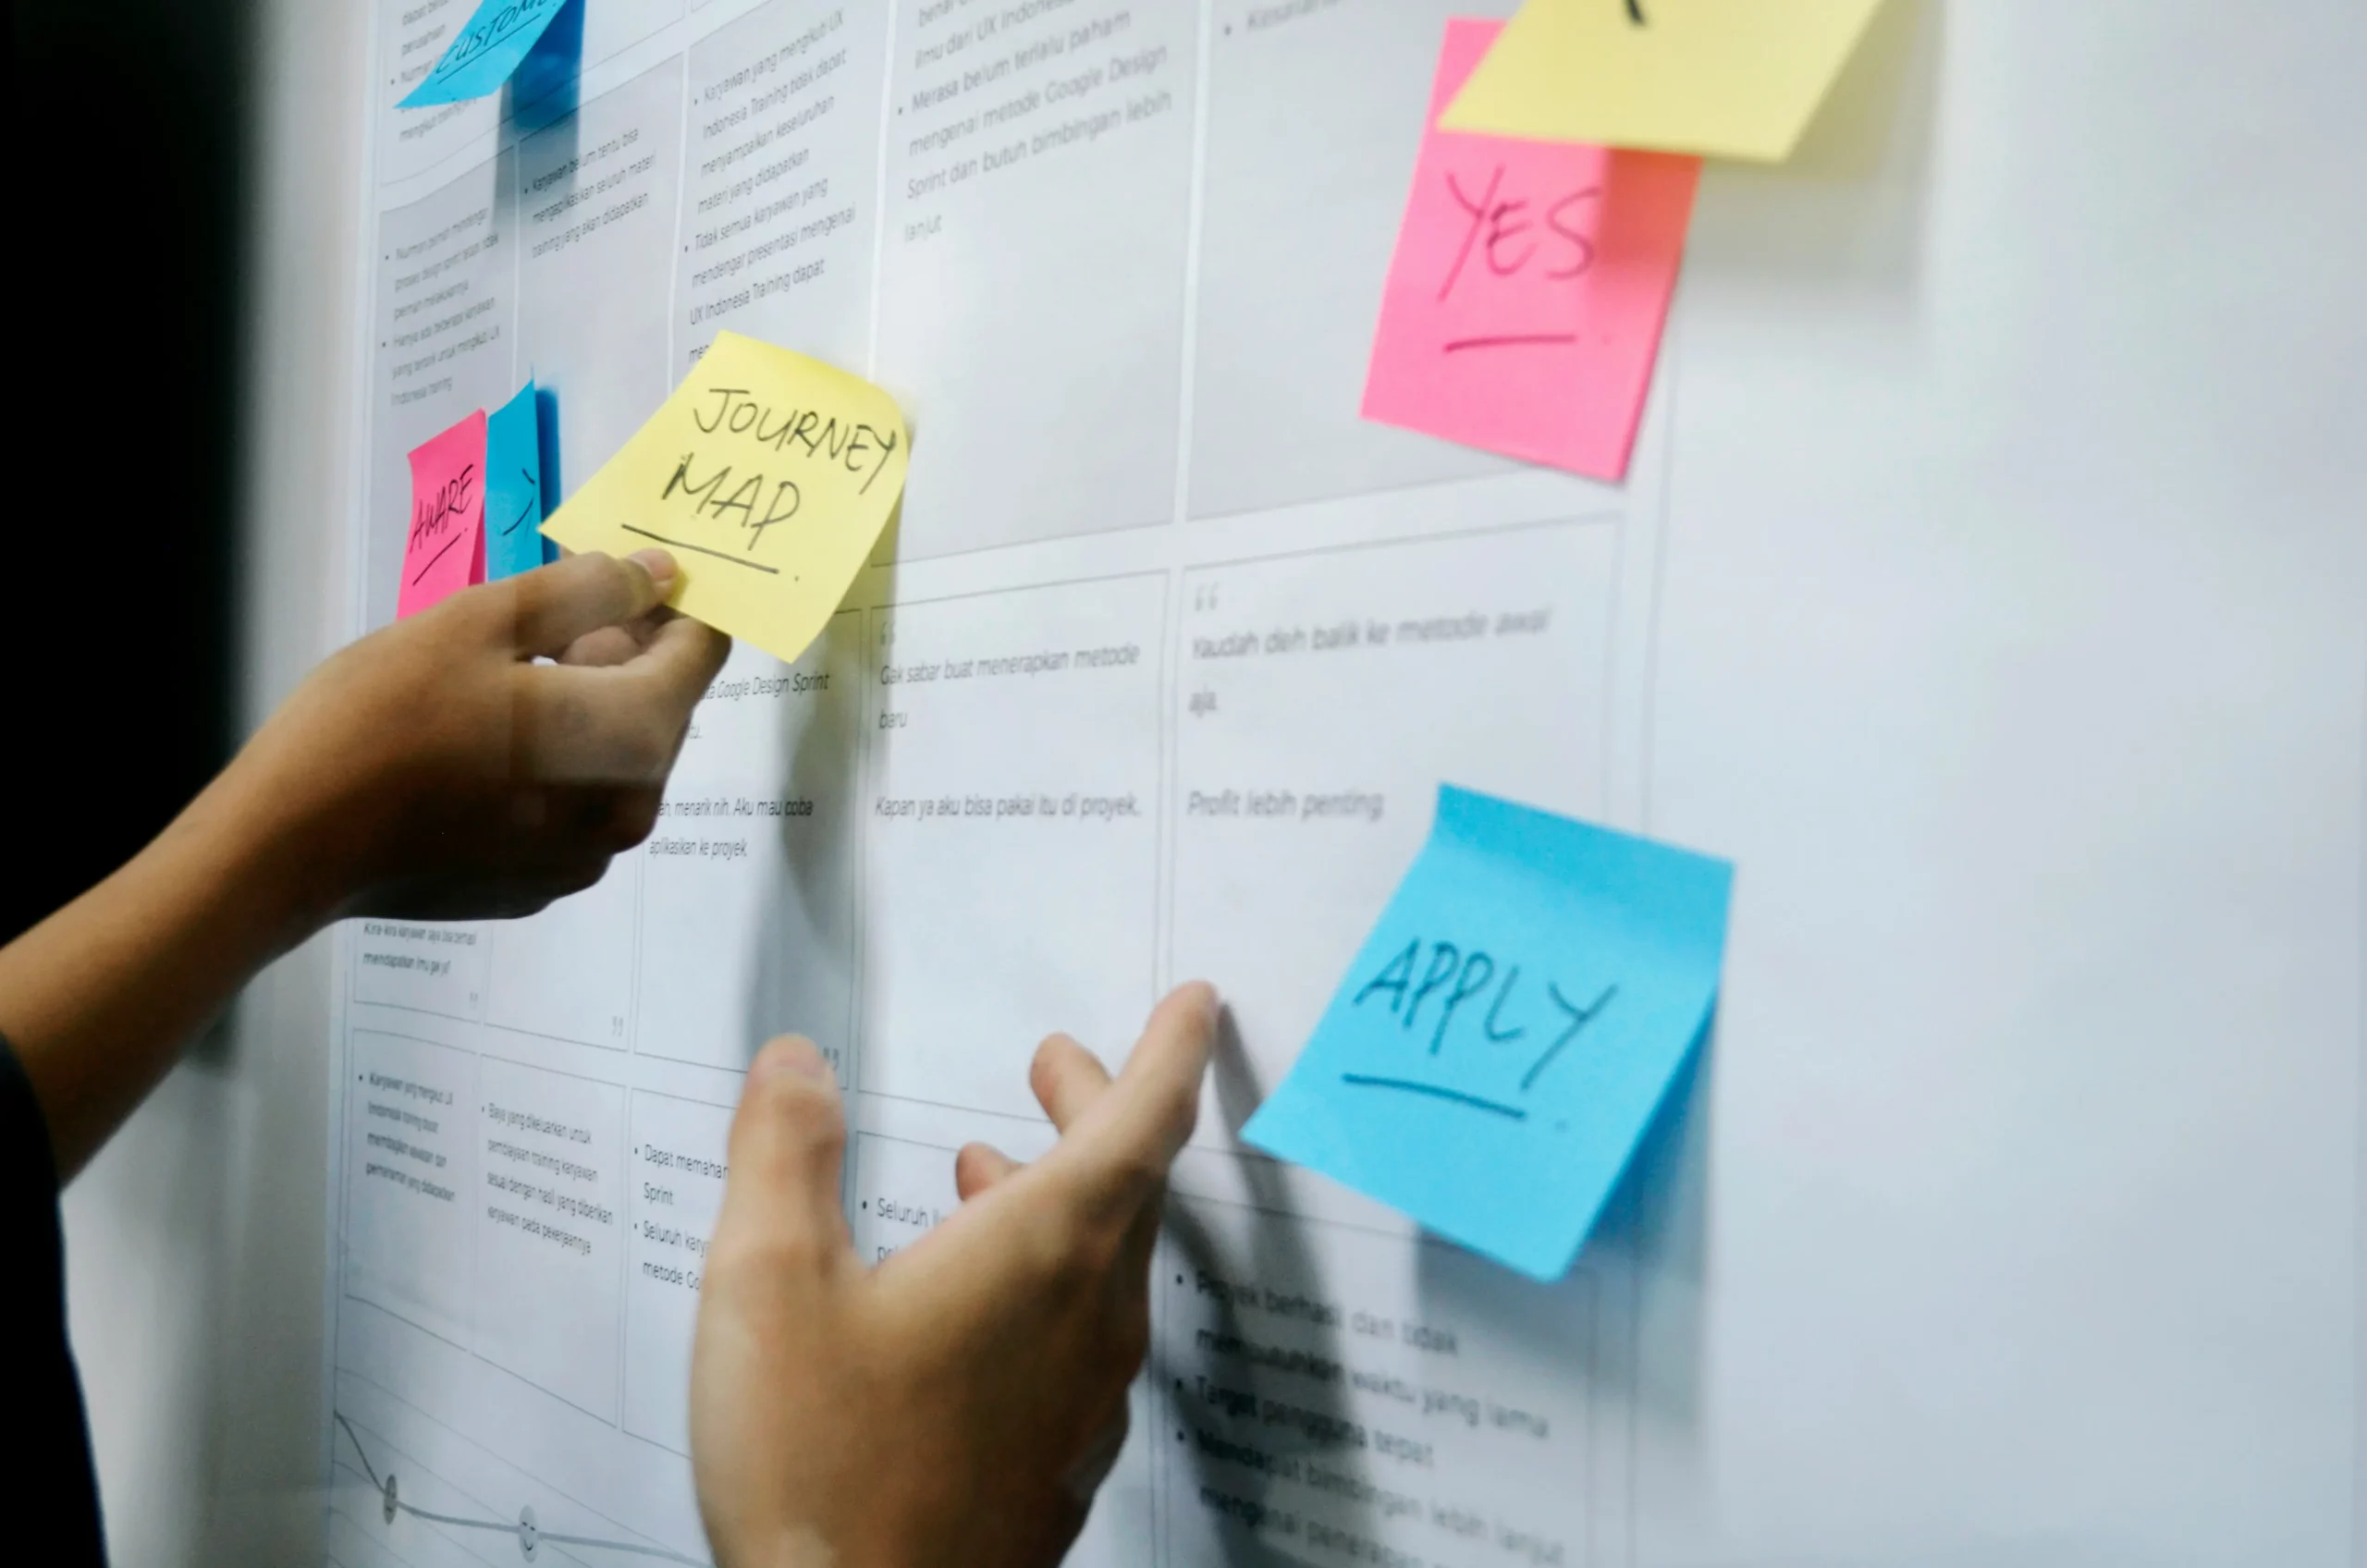 UX research operations